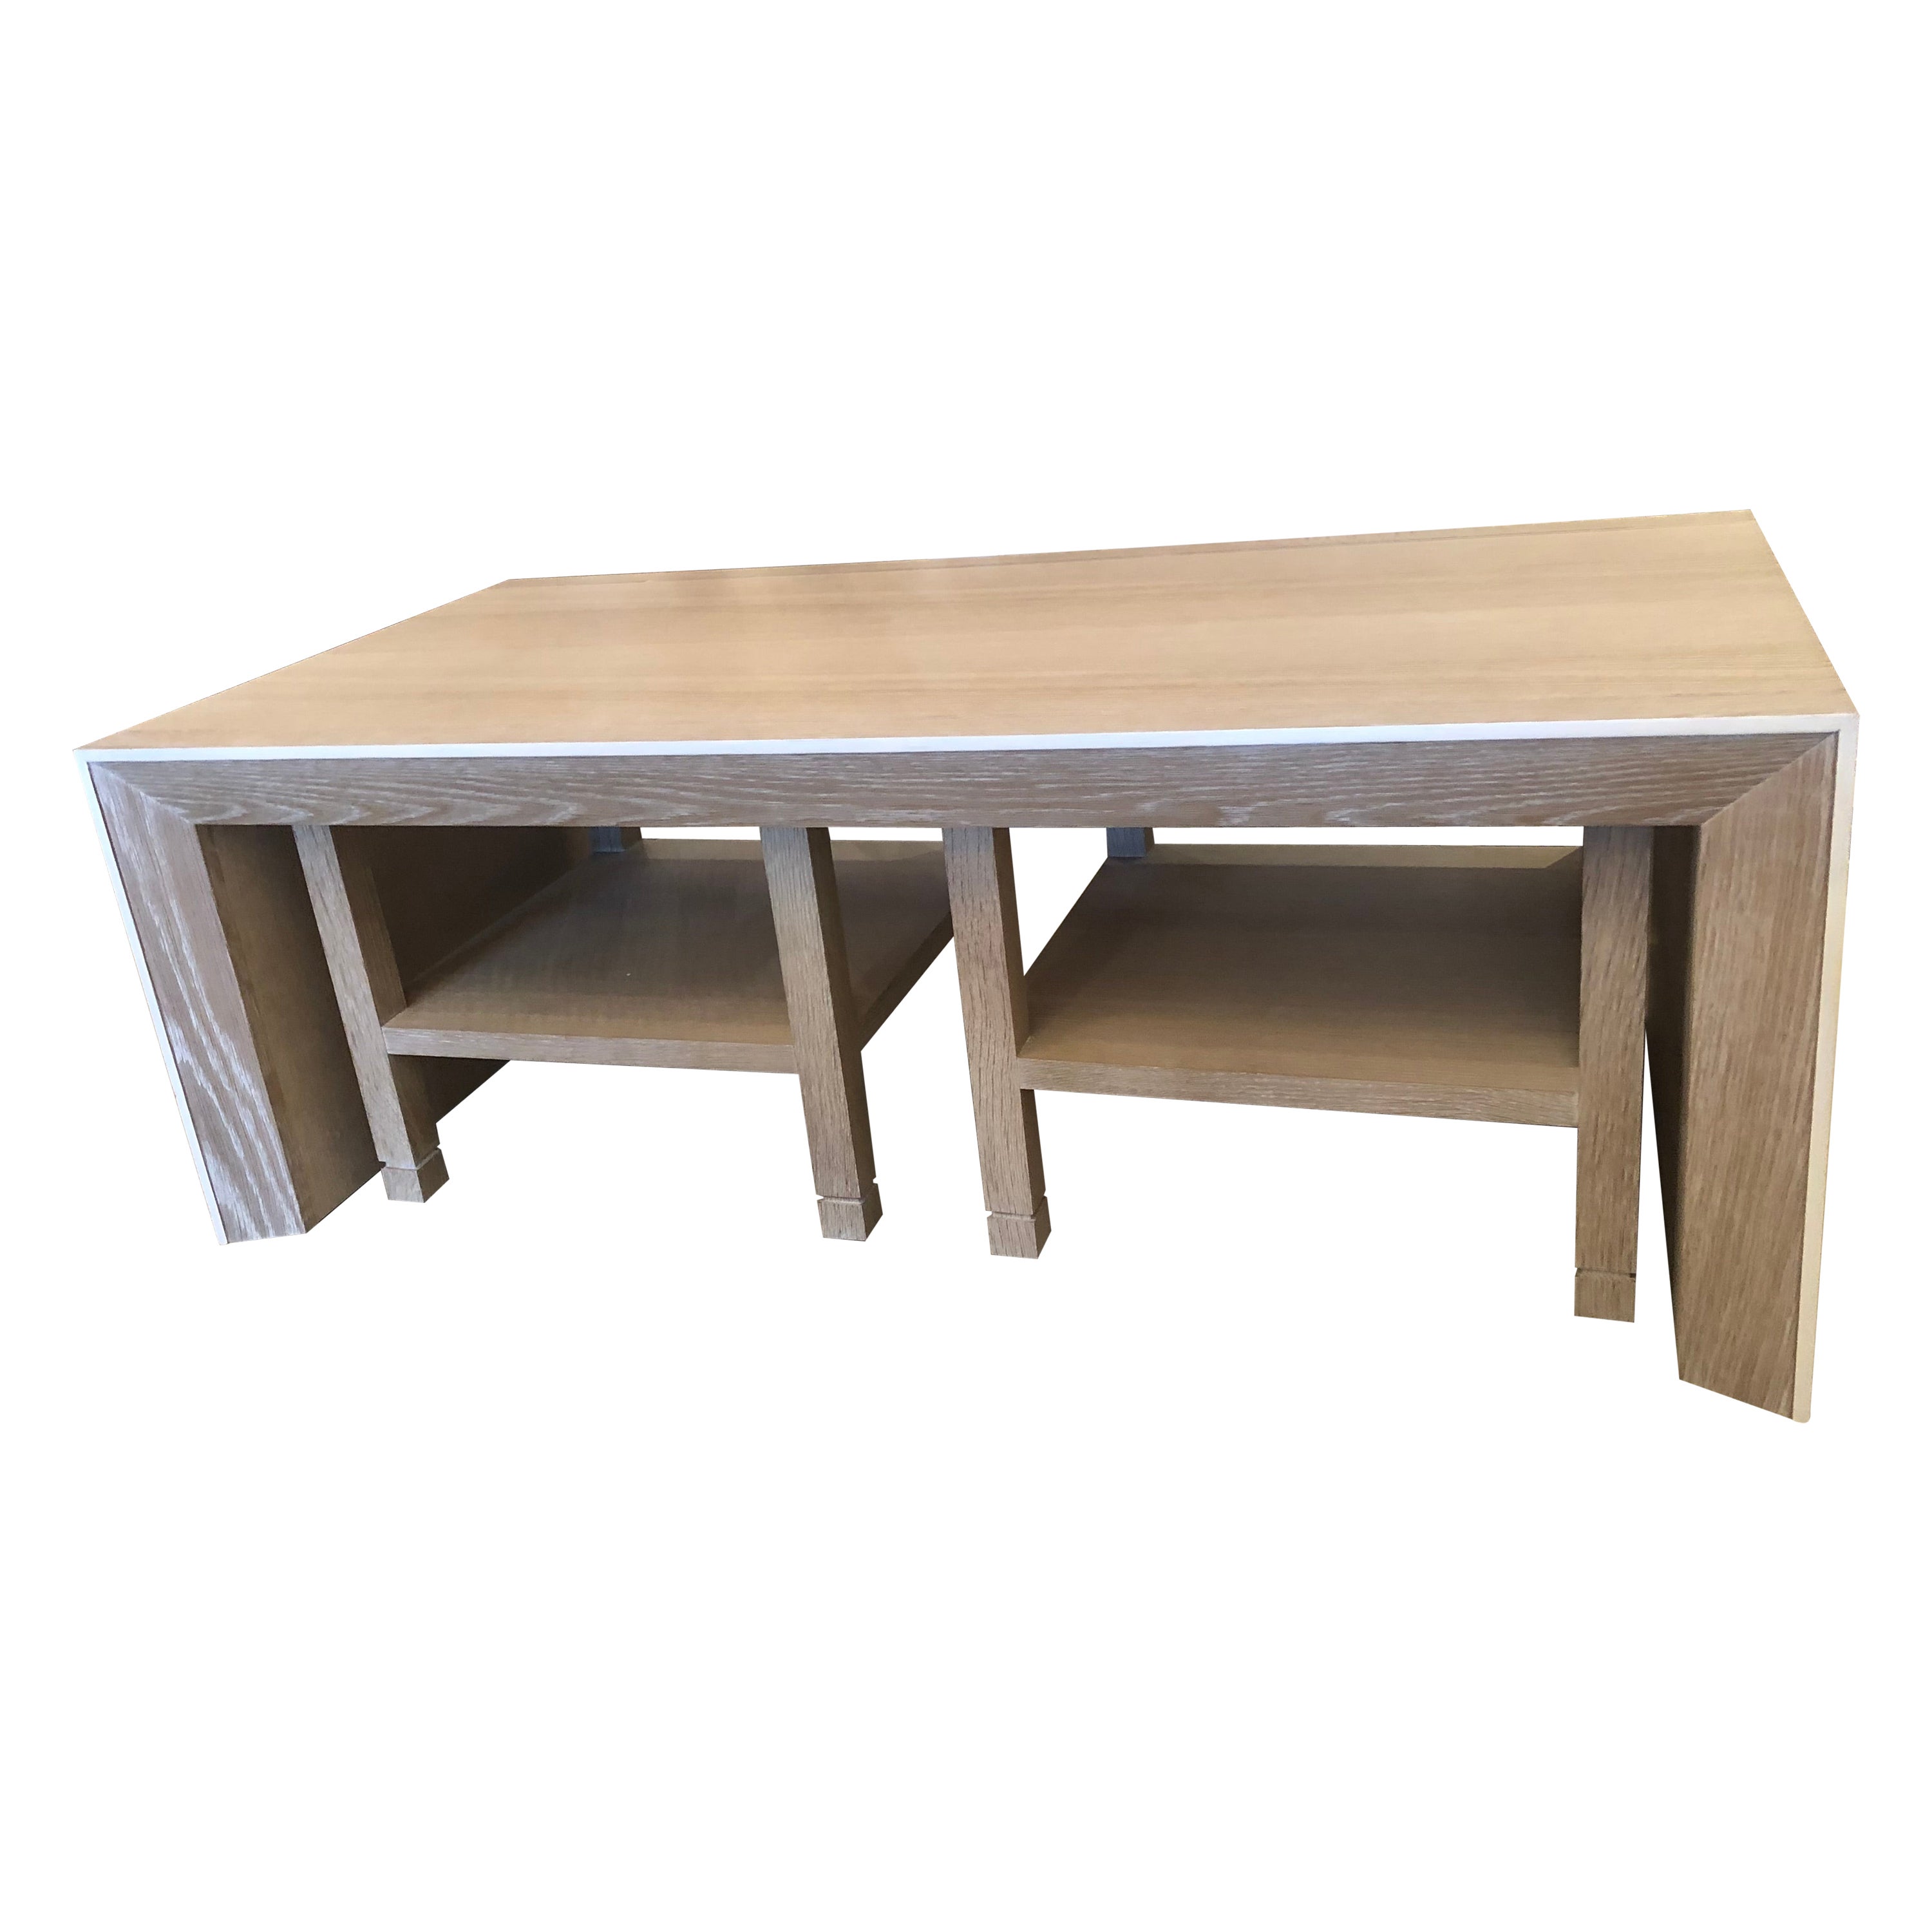 Sophisticated Cerused Wood Rectangular Coffee Table with Matching End Tables